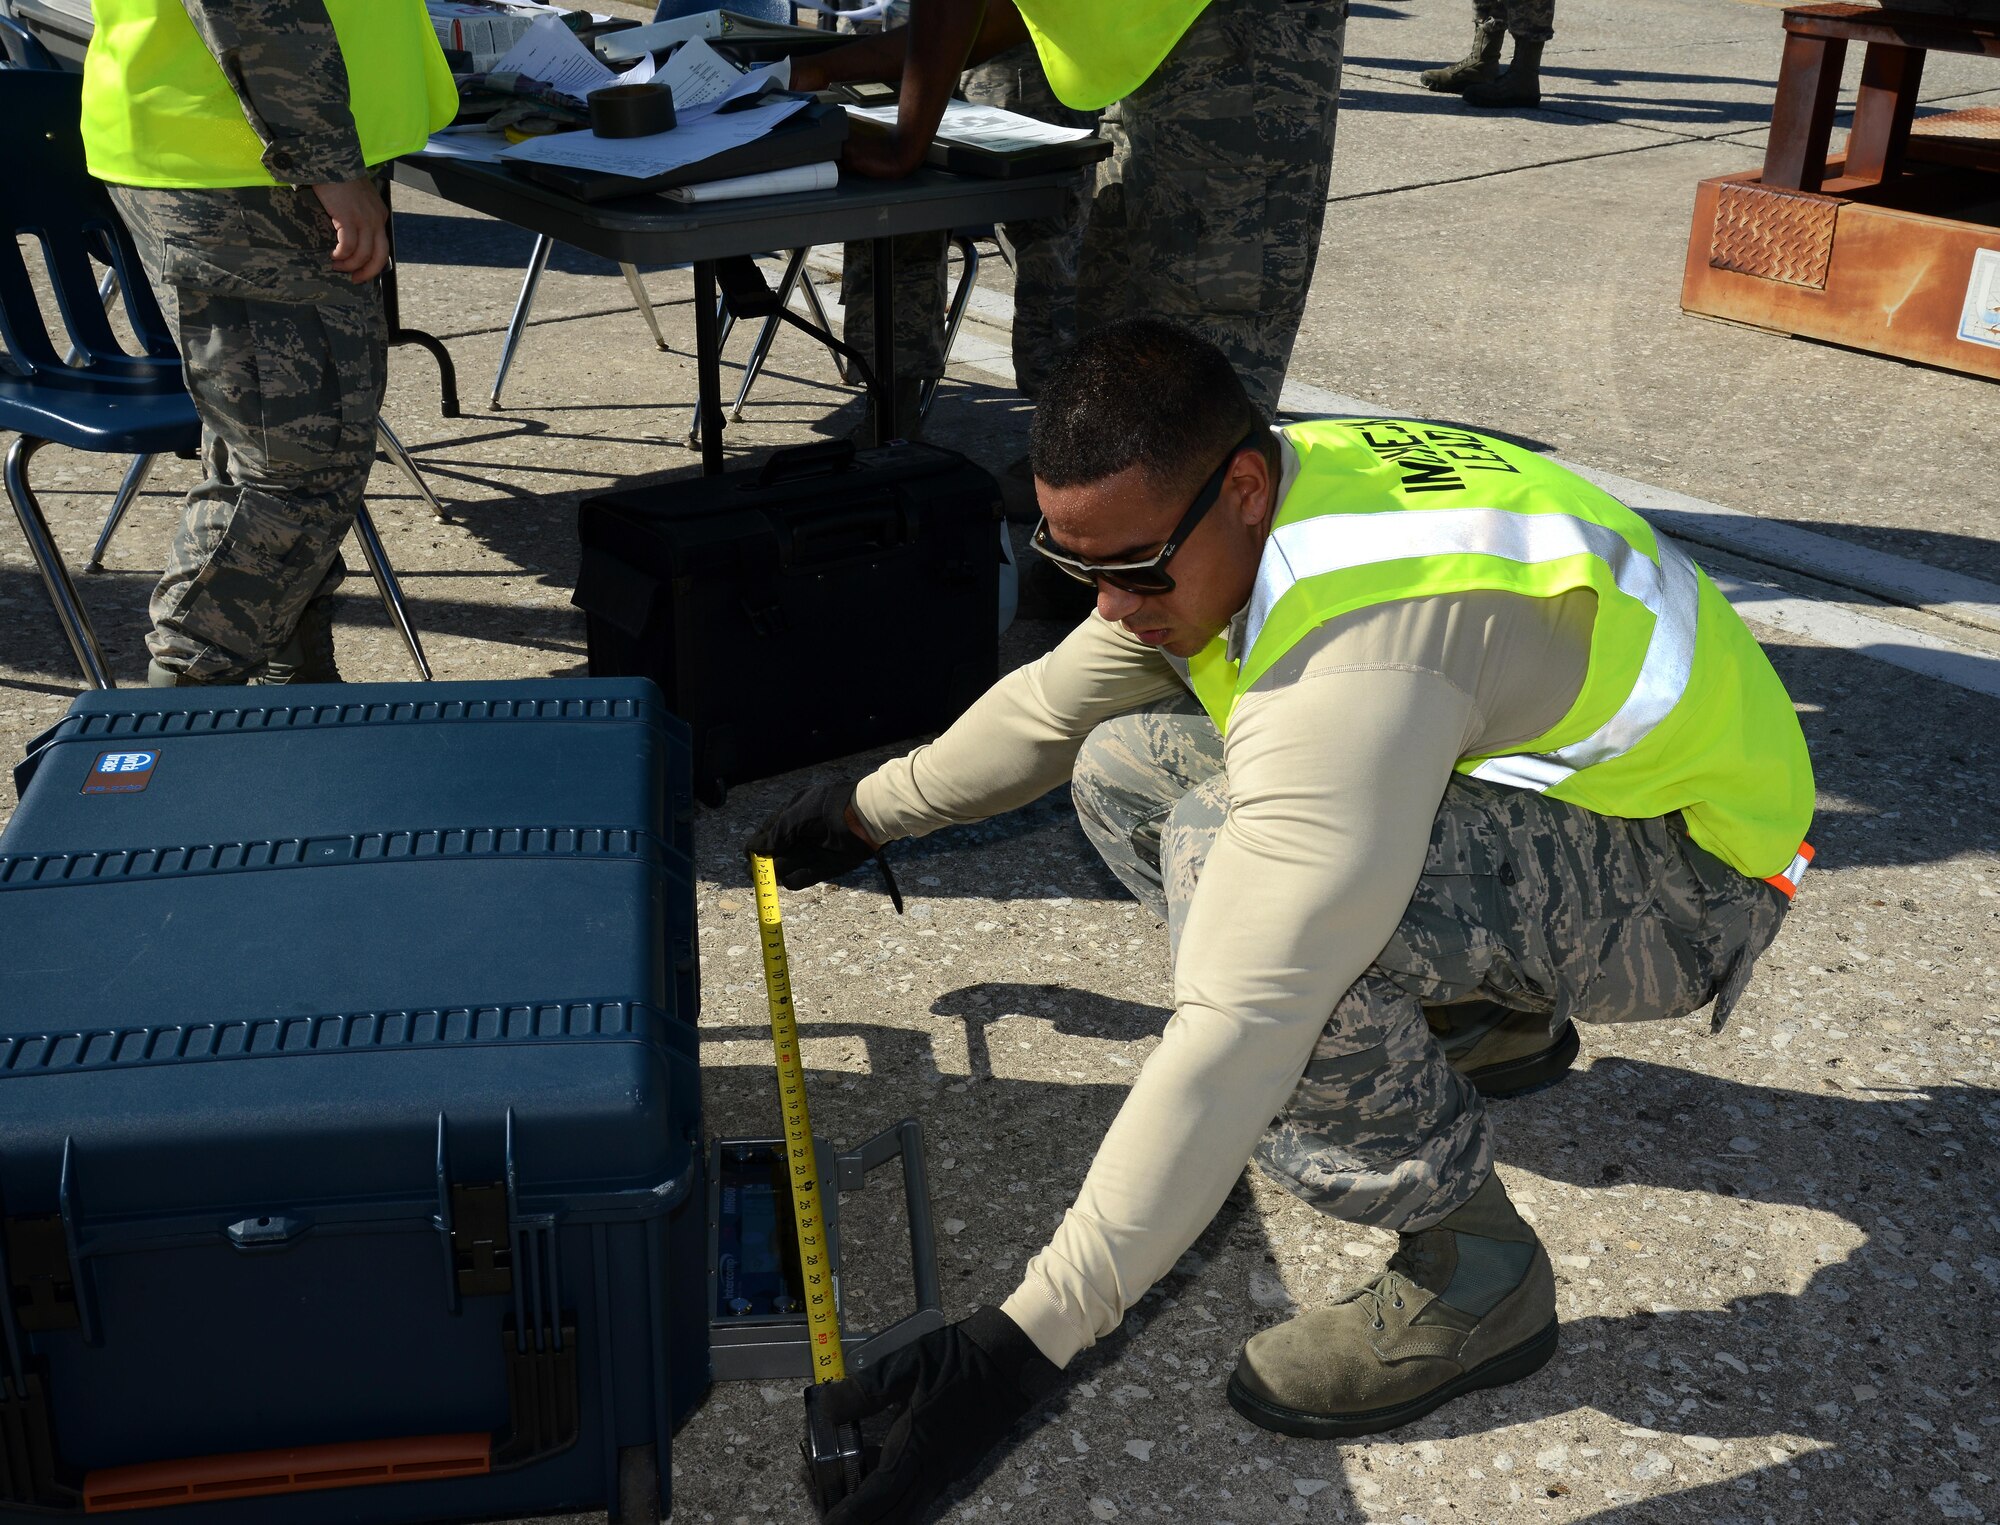 Staff Sgt. Allan Canizales, a mobility training instructor assigned to the 6th Logistics Readiness Squadron, weighs and measures cargo during a mobility exercise at MacDill Air Force Base, Fla., Aug. 16, 2016. Canizales was in charge of checking that all equipment being processed is documented with accurate size and weight measurements. (U.S. Air Force Photo by Airman 1st Class Rito Smith)